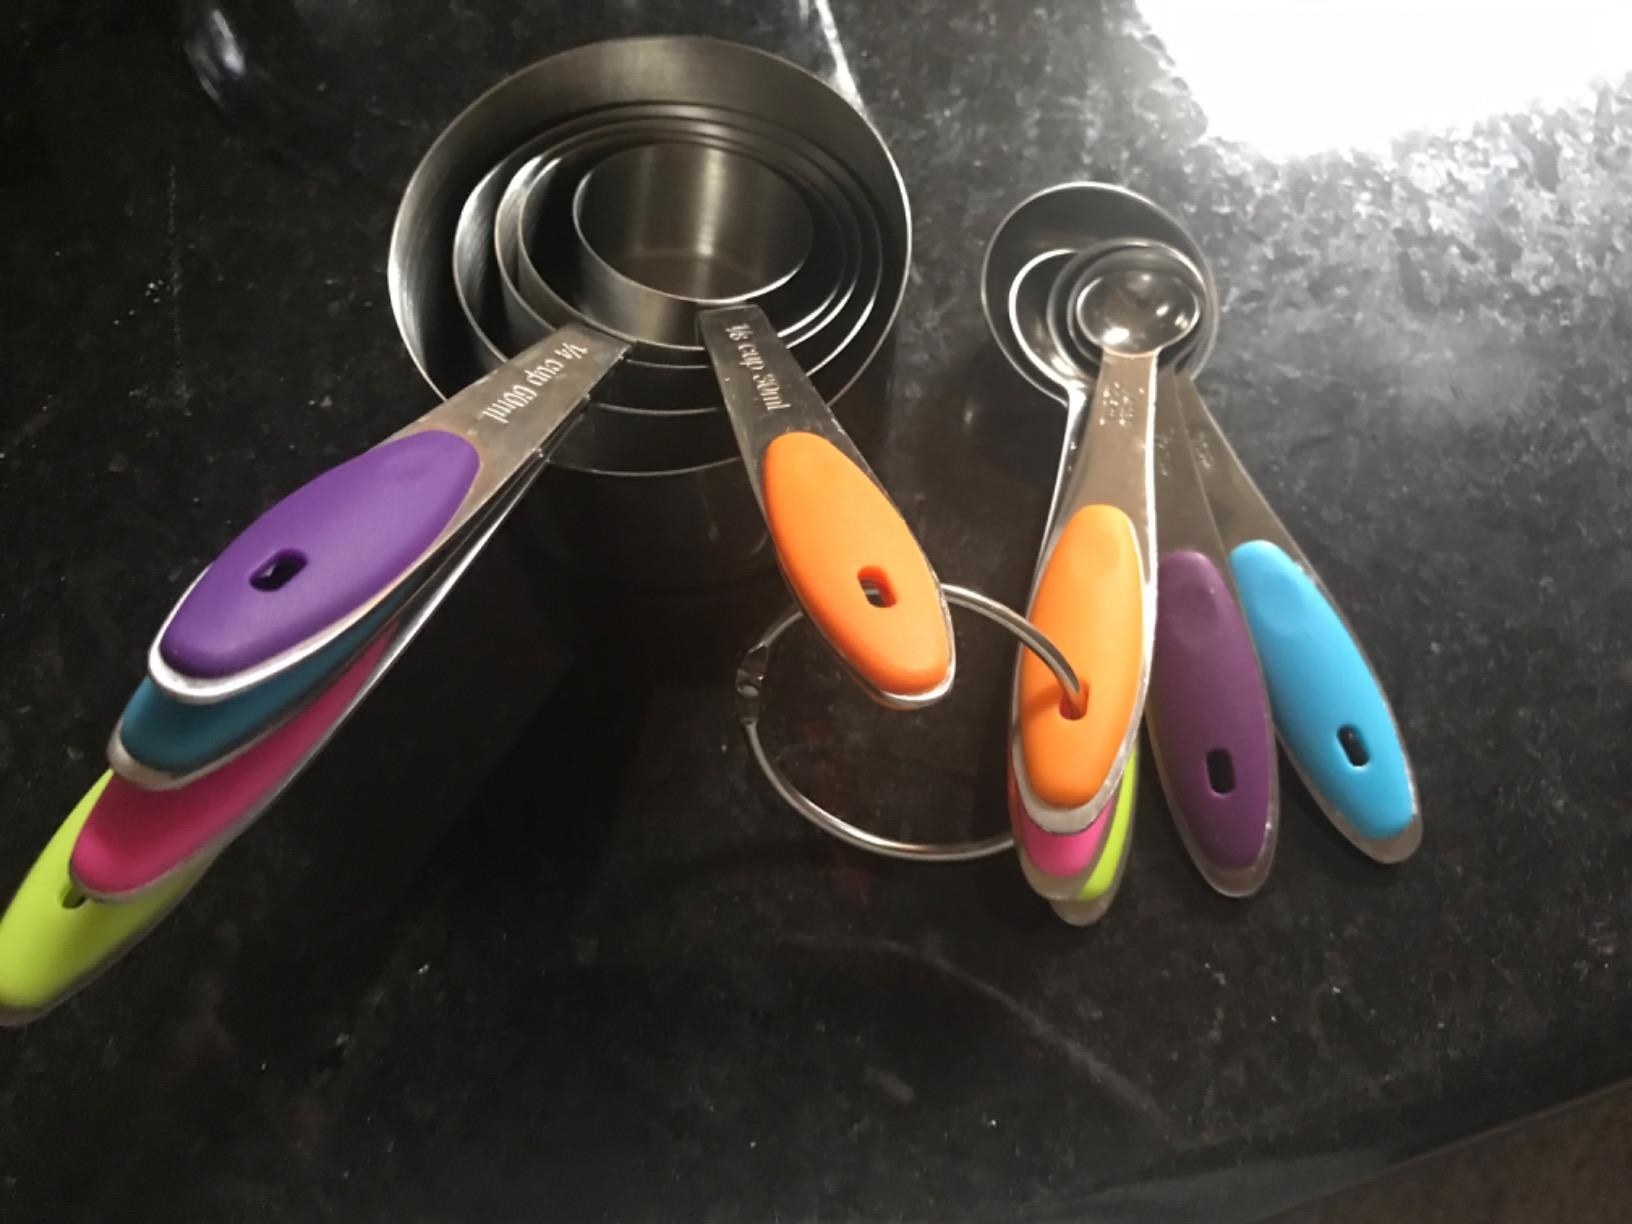 the set of 12 Kitchen Measuring Cups and Spoons on a kitchen counter